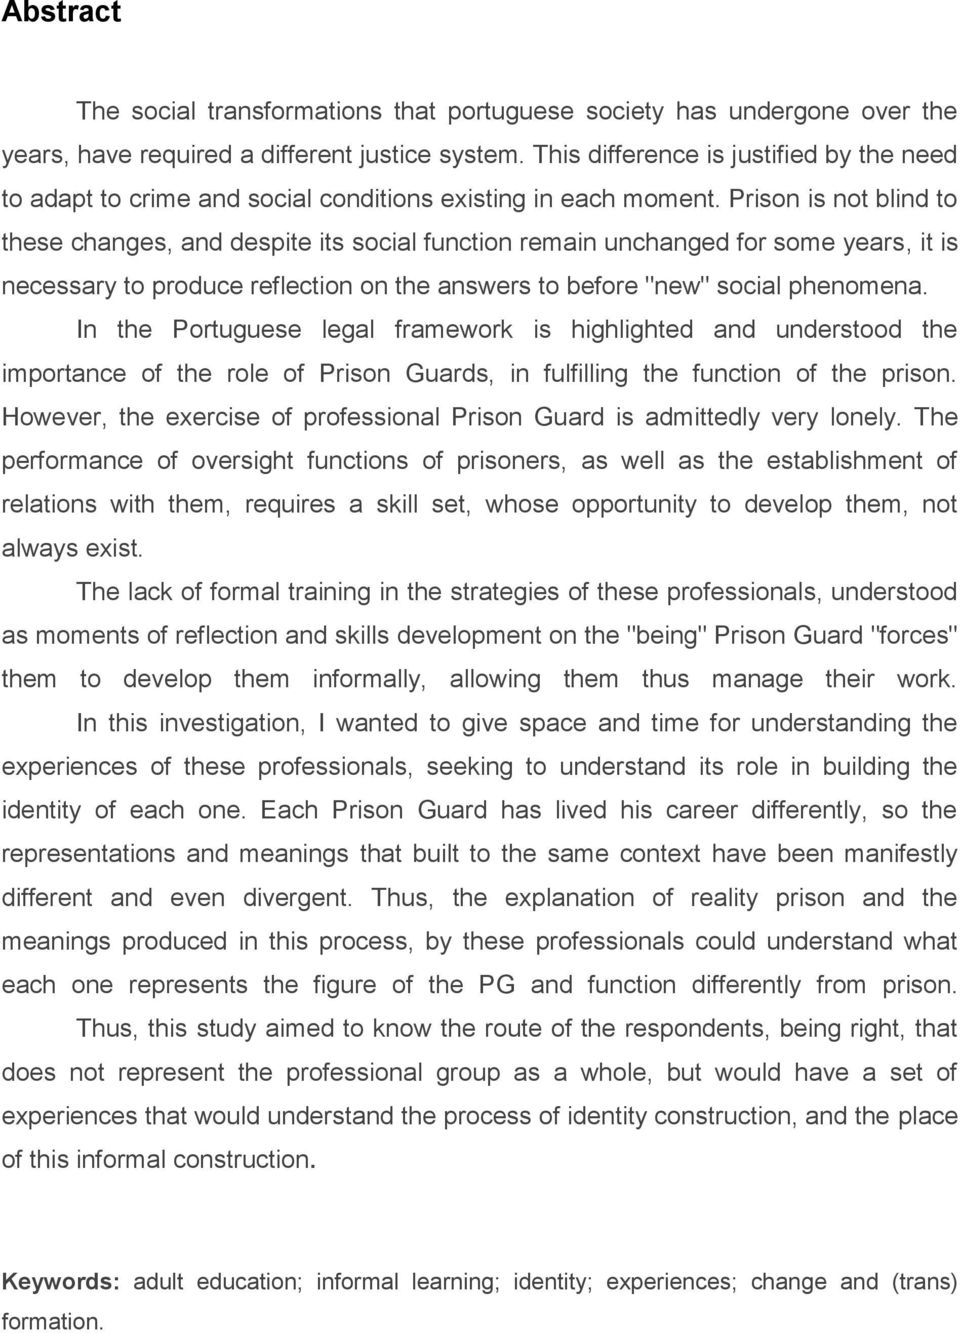 Prison is not blind to these changes, and despite its social function remain unchanged for some years, it is necessary to produce reflection on the answers to before "new" social phenomena.